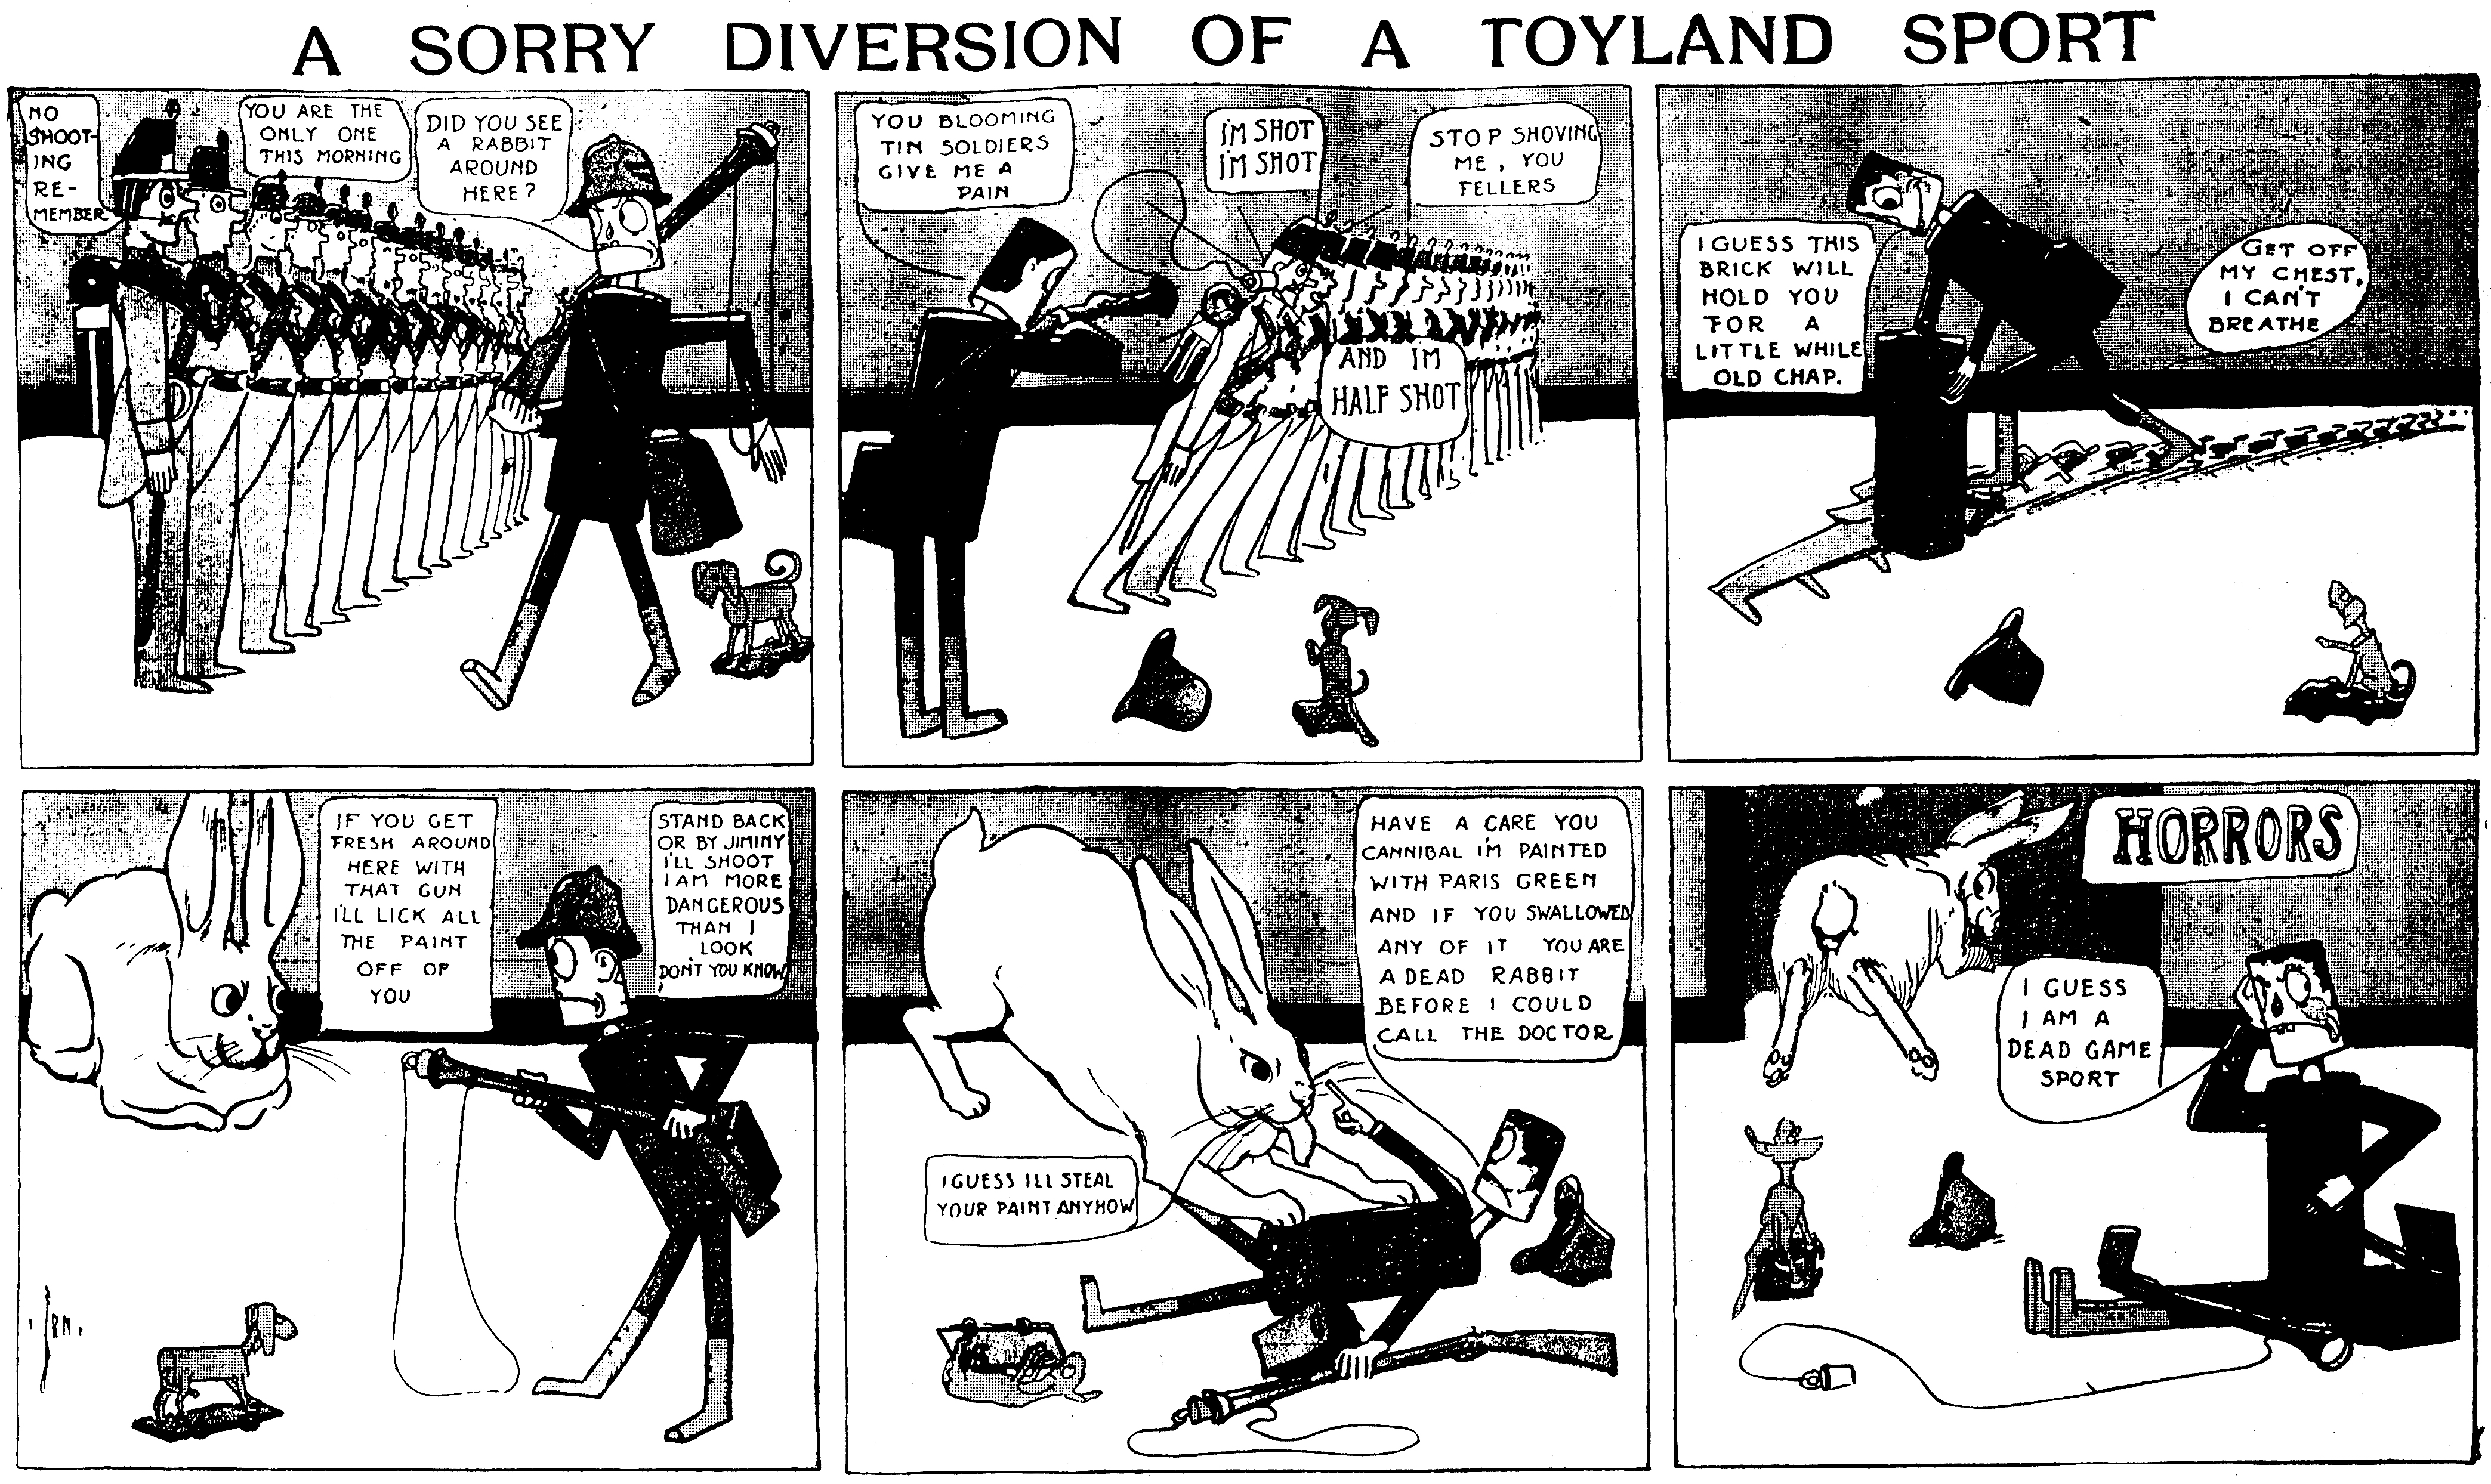 A Sorry Diversion of a Toyland Sport